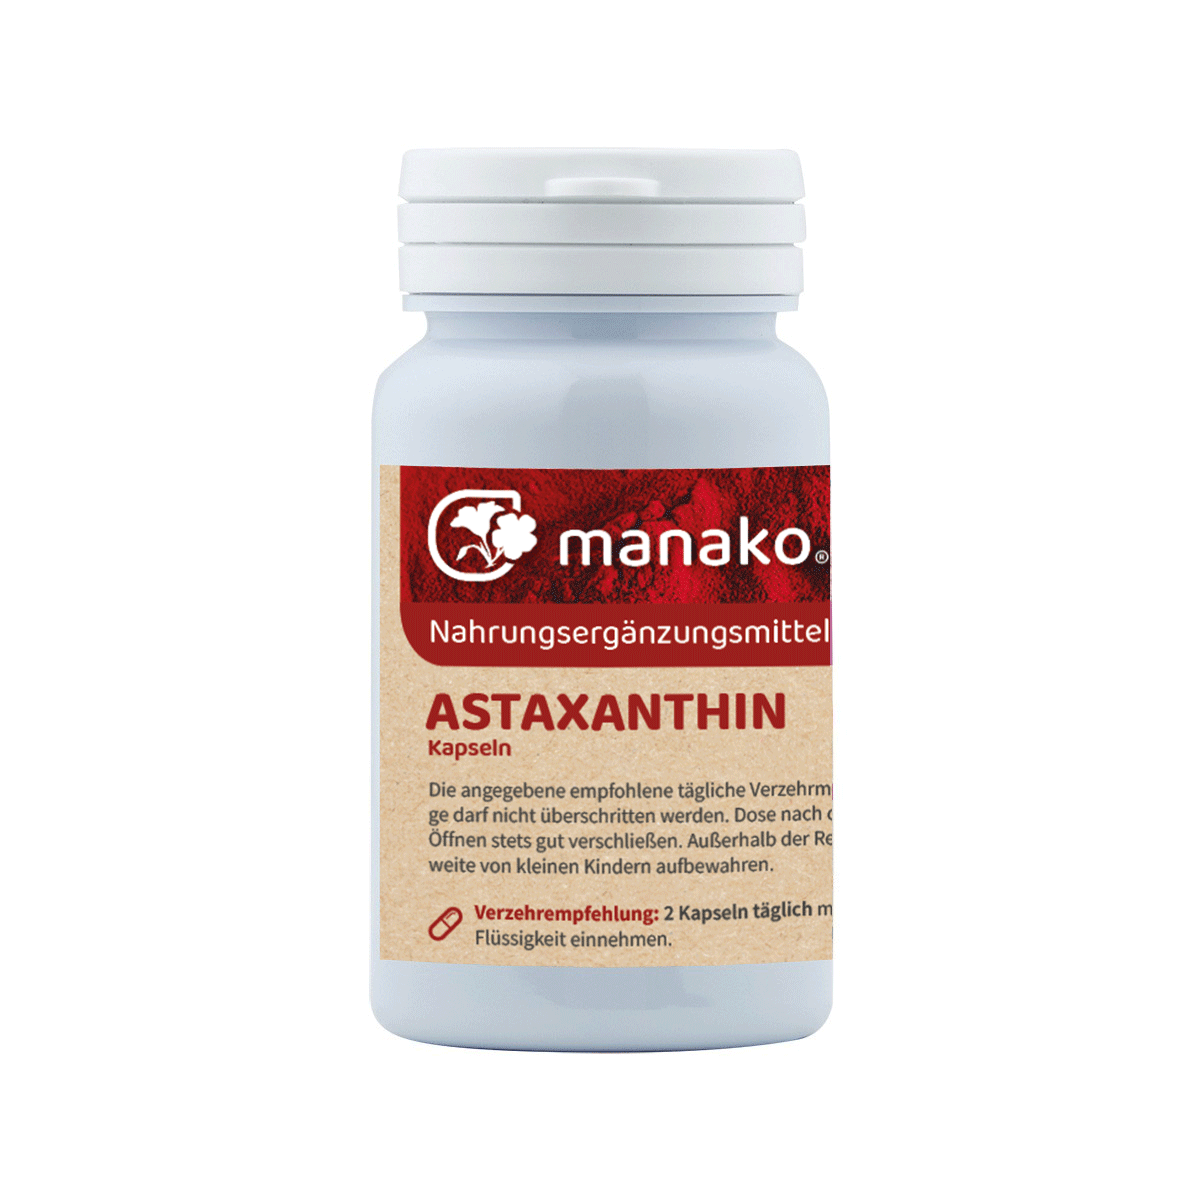 manako Astaxanthin vegetarian capsules, 90 pieces, can of 22g